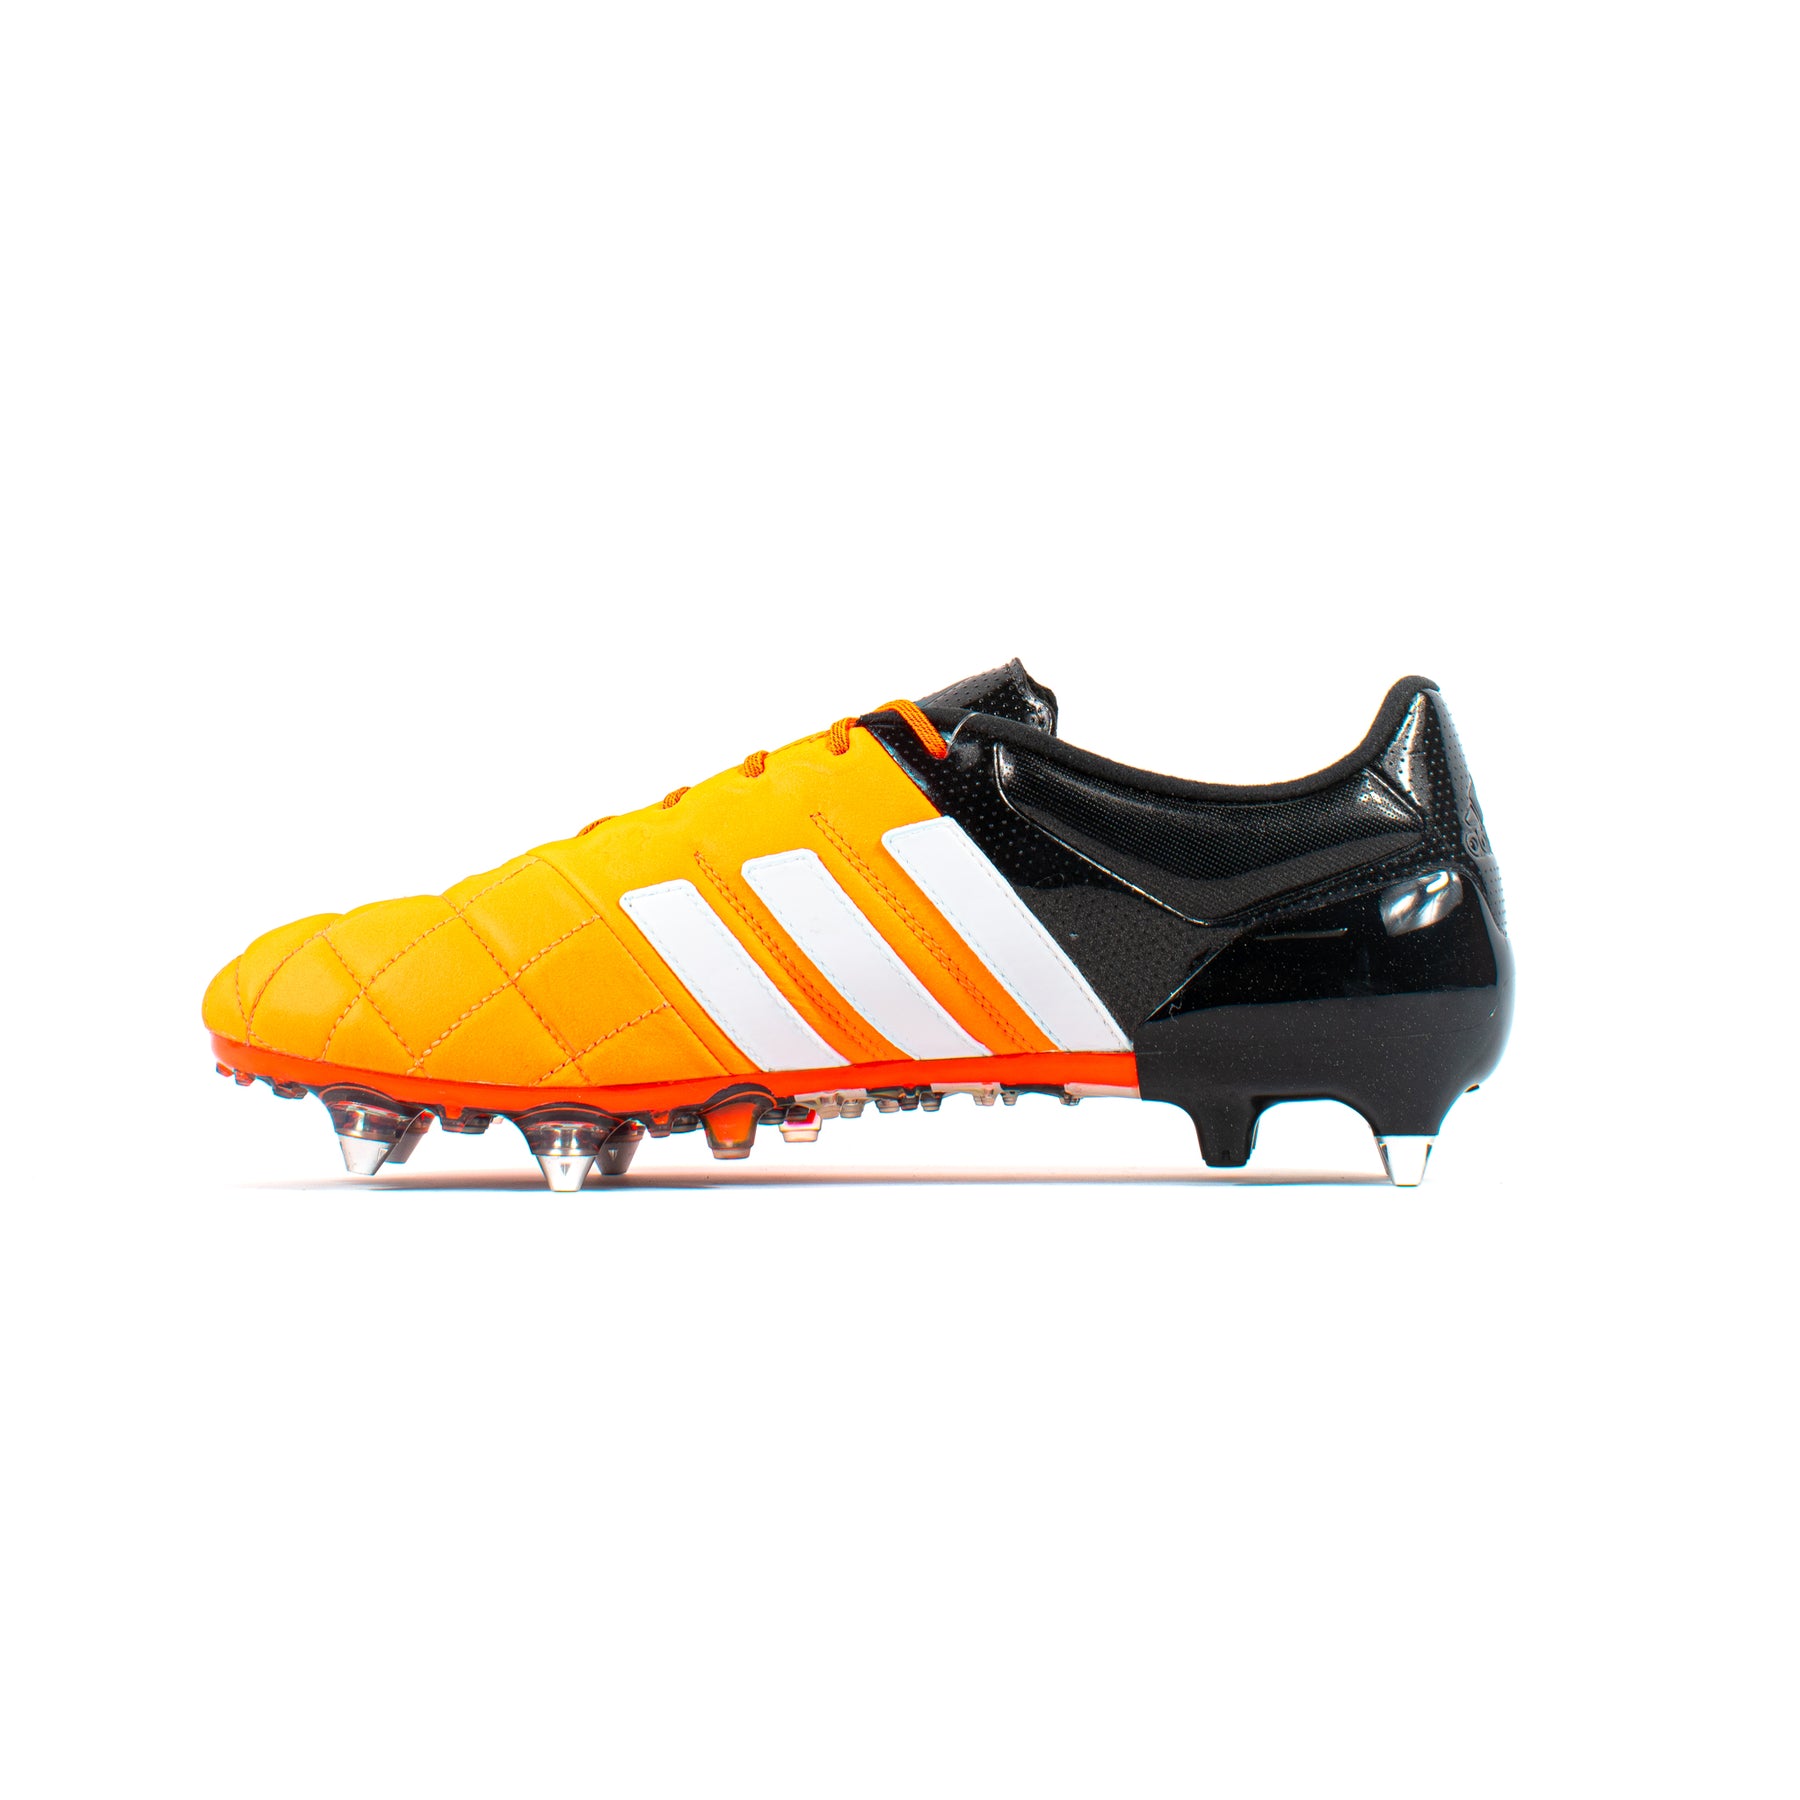 Adidas Leather – Classic Soccer Cleats